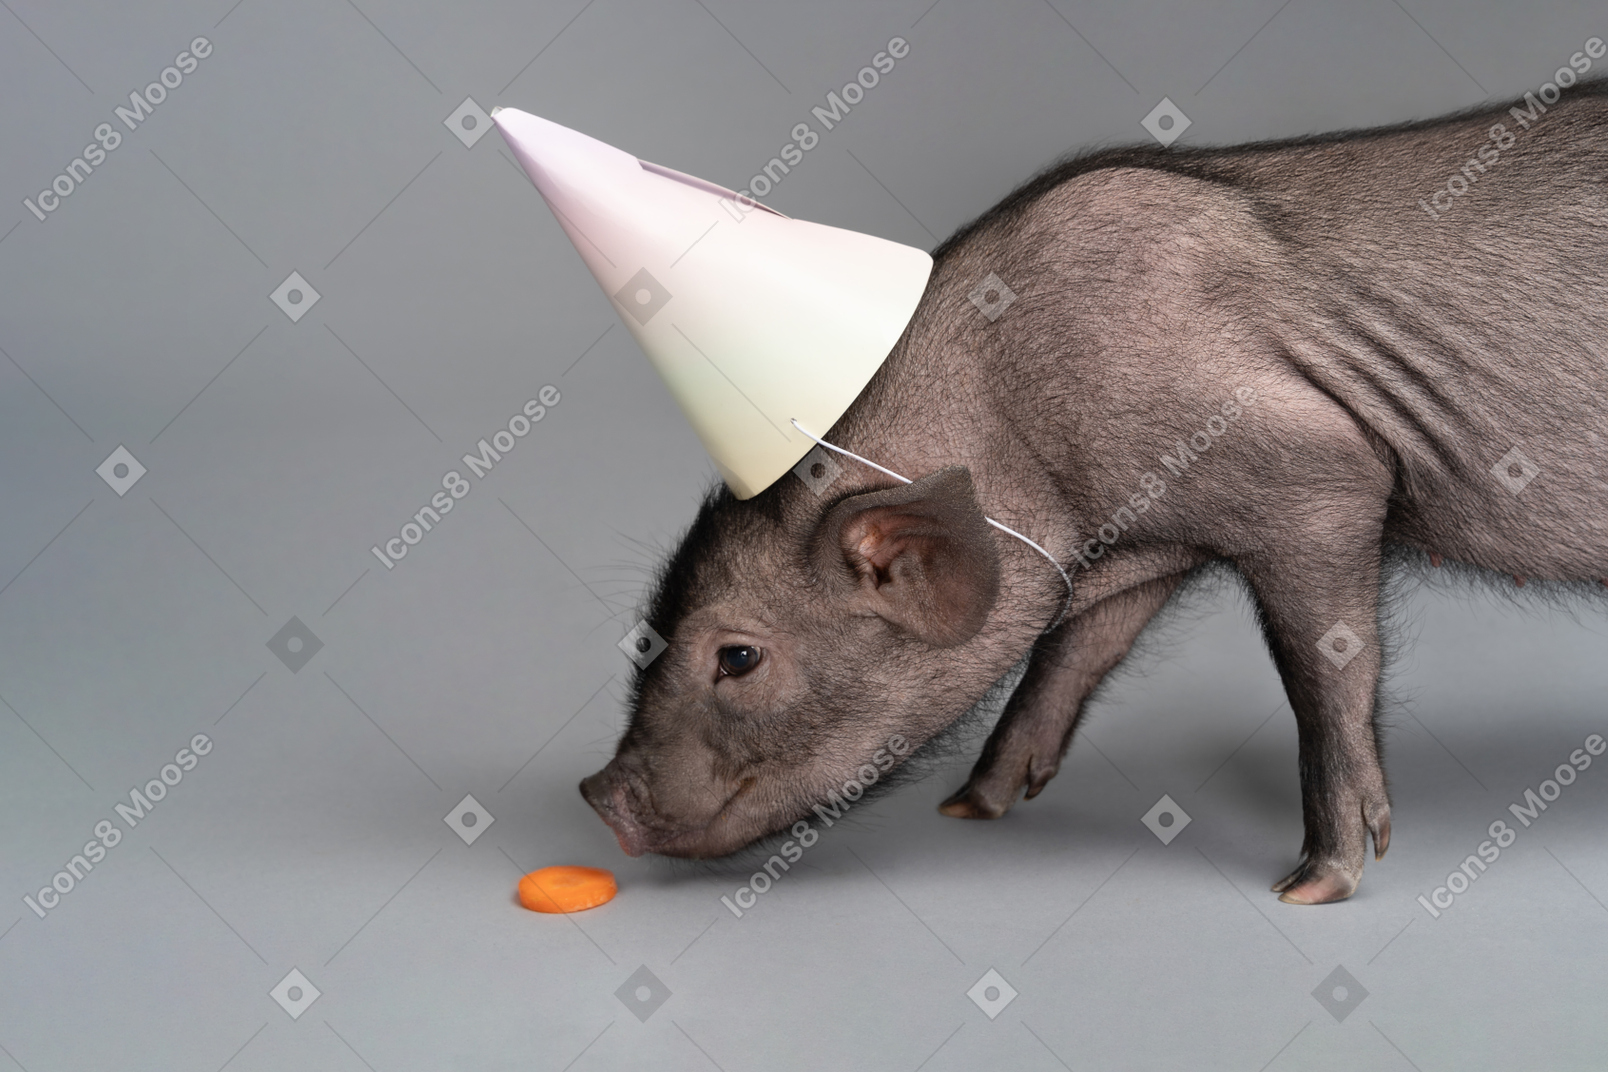 Cute miniature pig with a party hat on its head is sniffing a piece of carrot